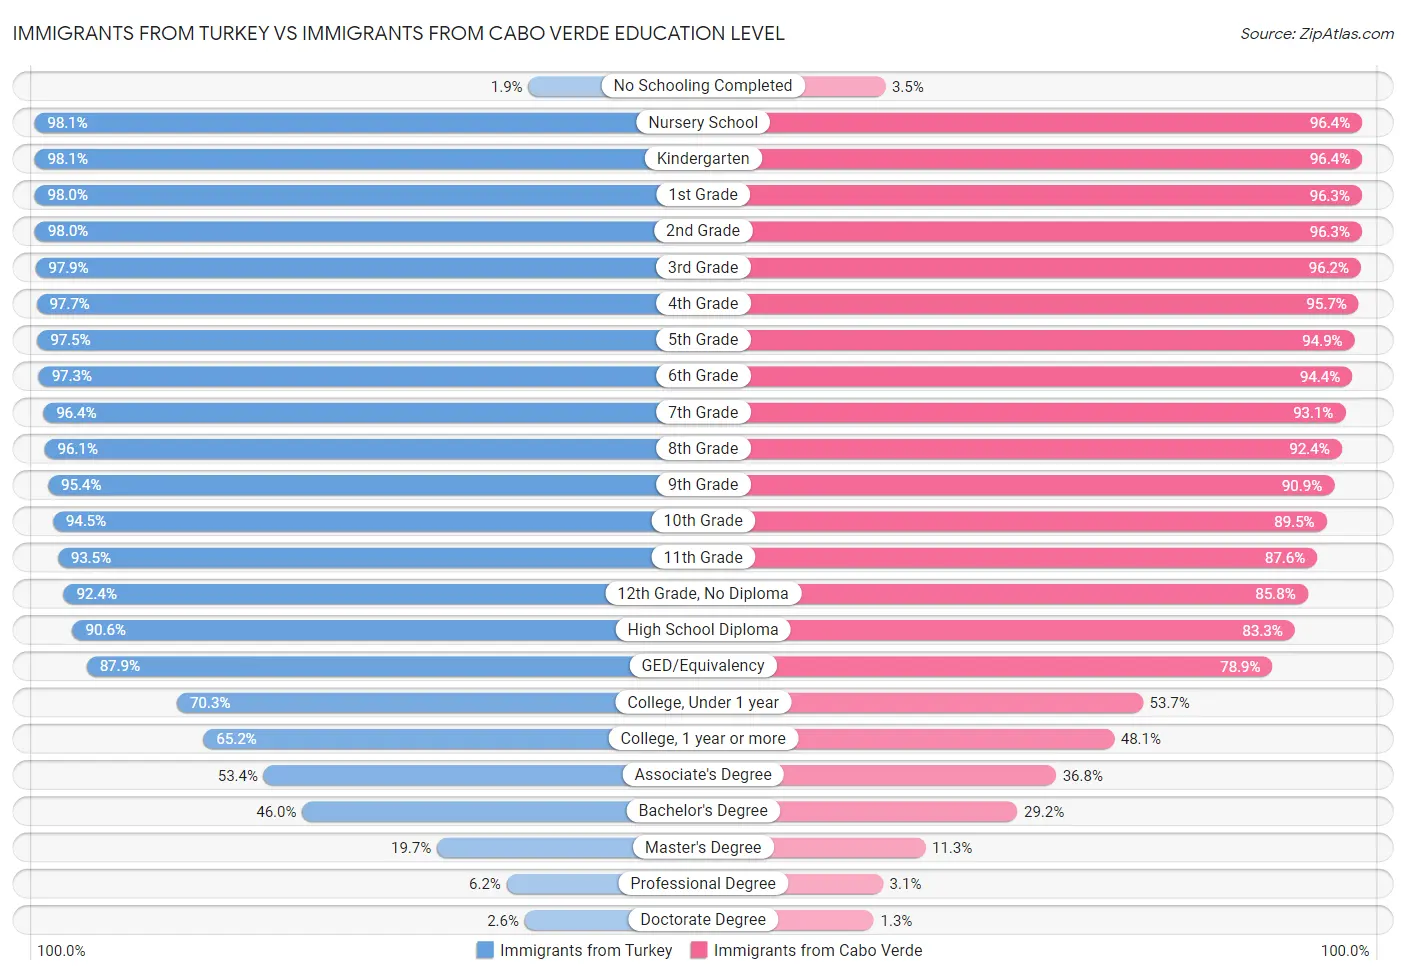 Immigrants from Turkey vs Immigrants from Cabo Verde Education Level